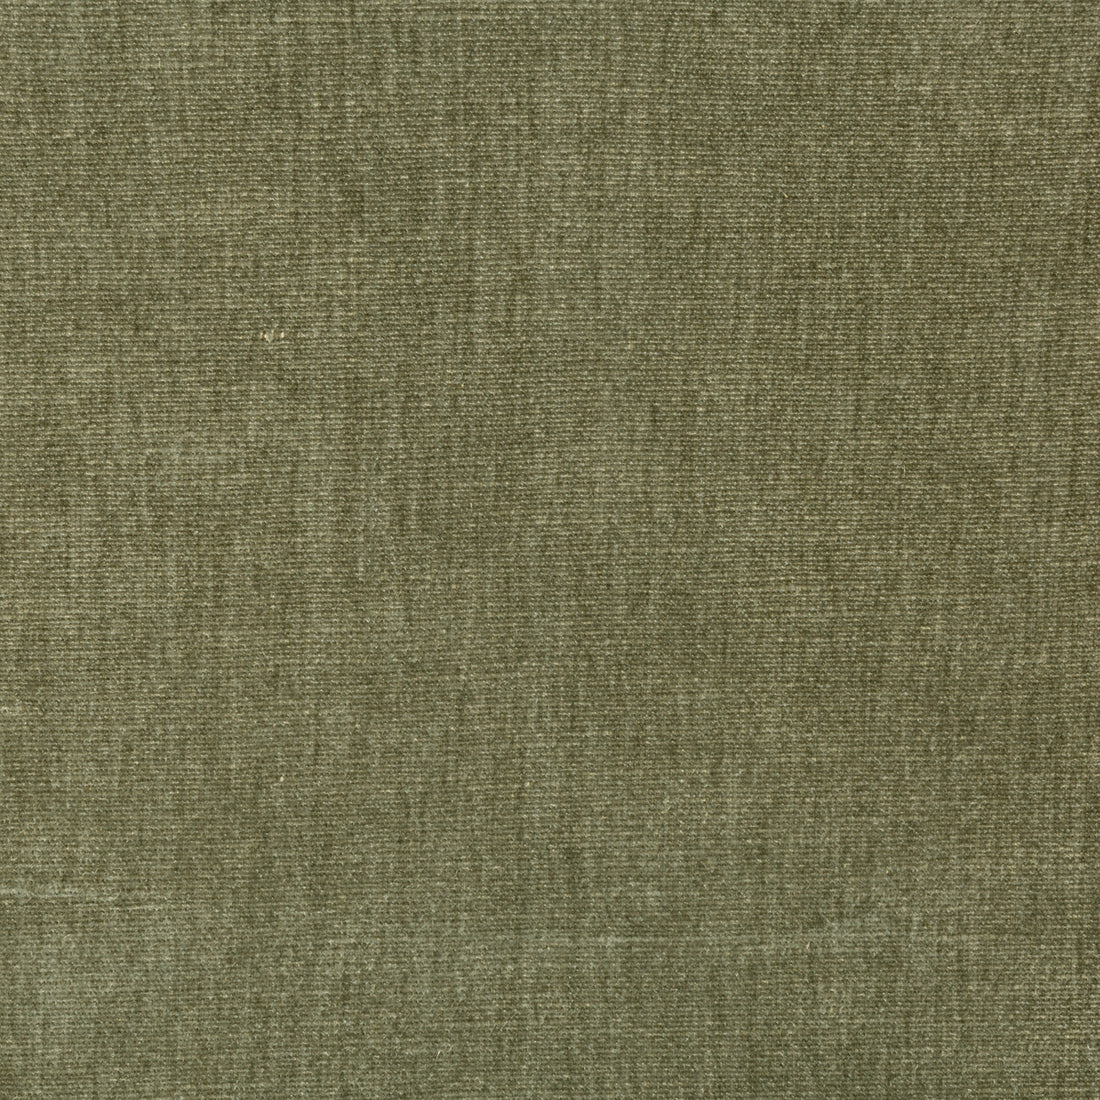 Kravet Smart fabric in 36076-606 color - pattern 36076.606.0 - by Kravet Smart in the Sumptuous Chenille II collection